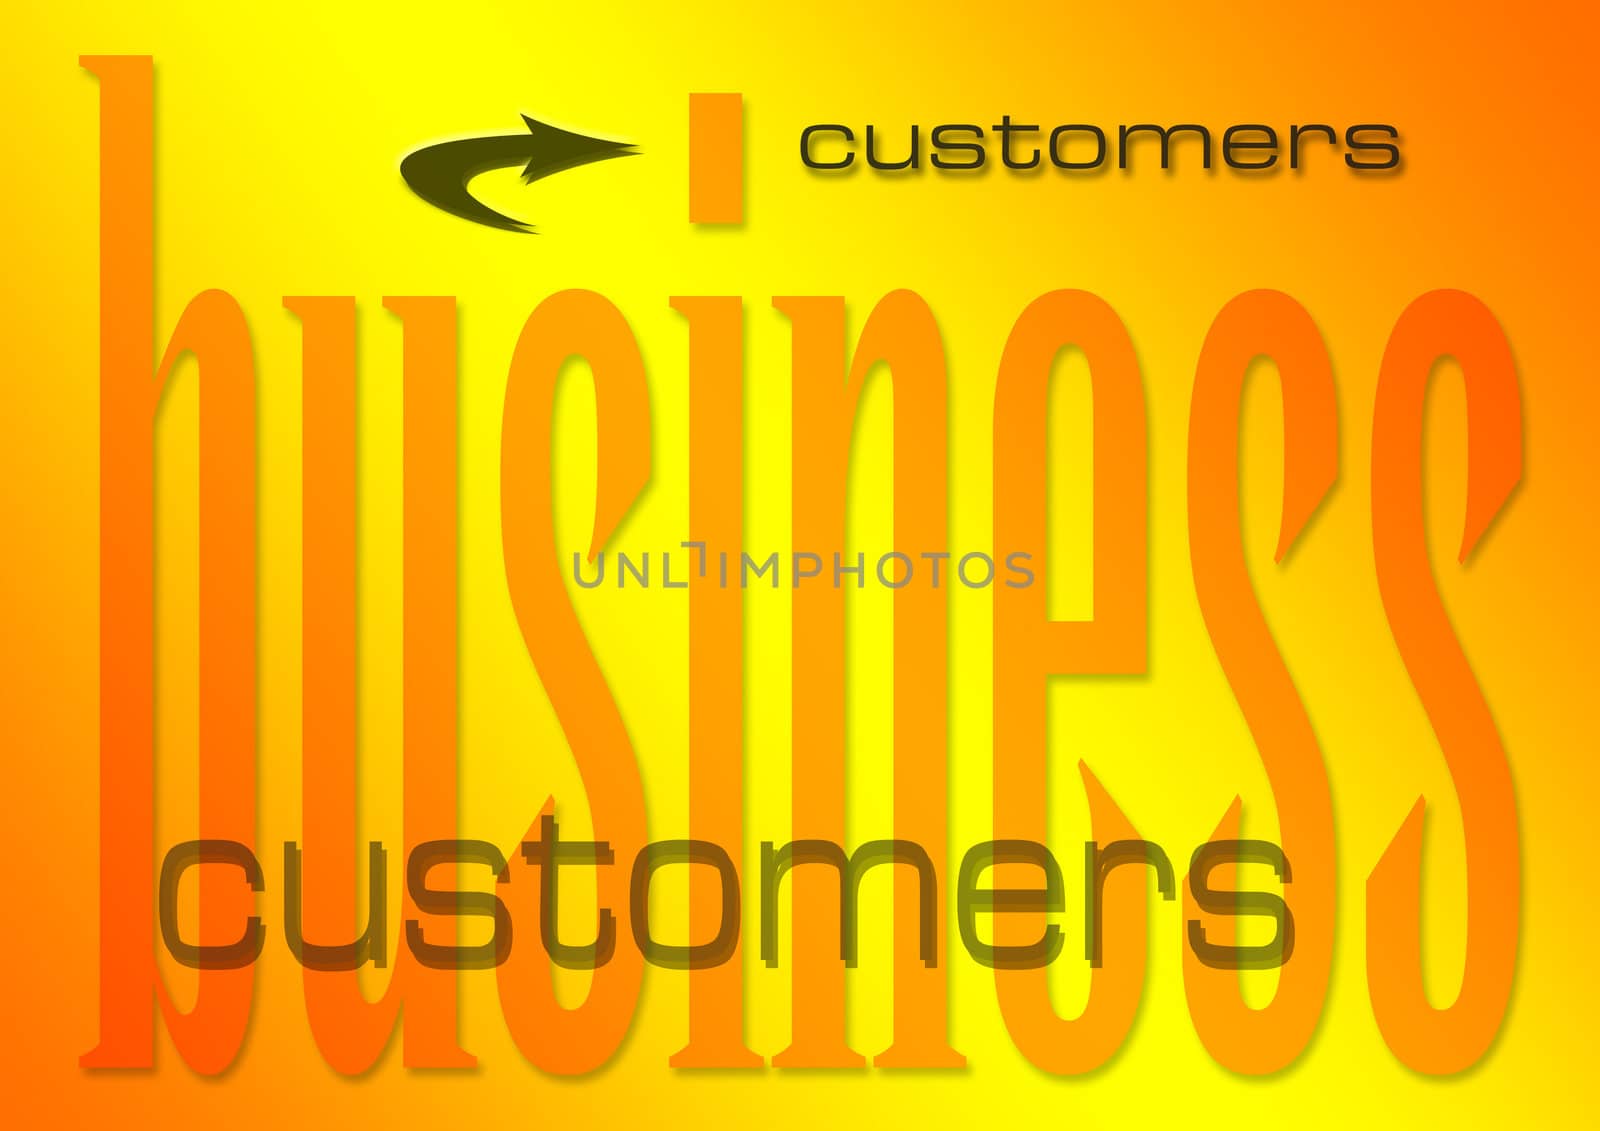 business customers illustration on flaming background